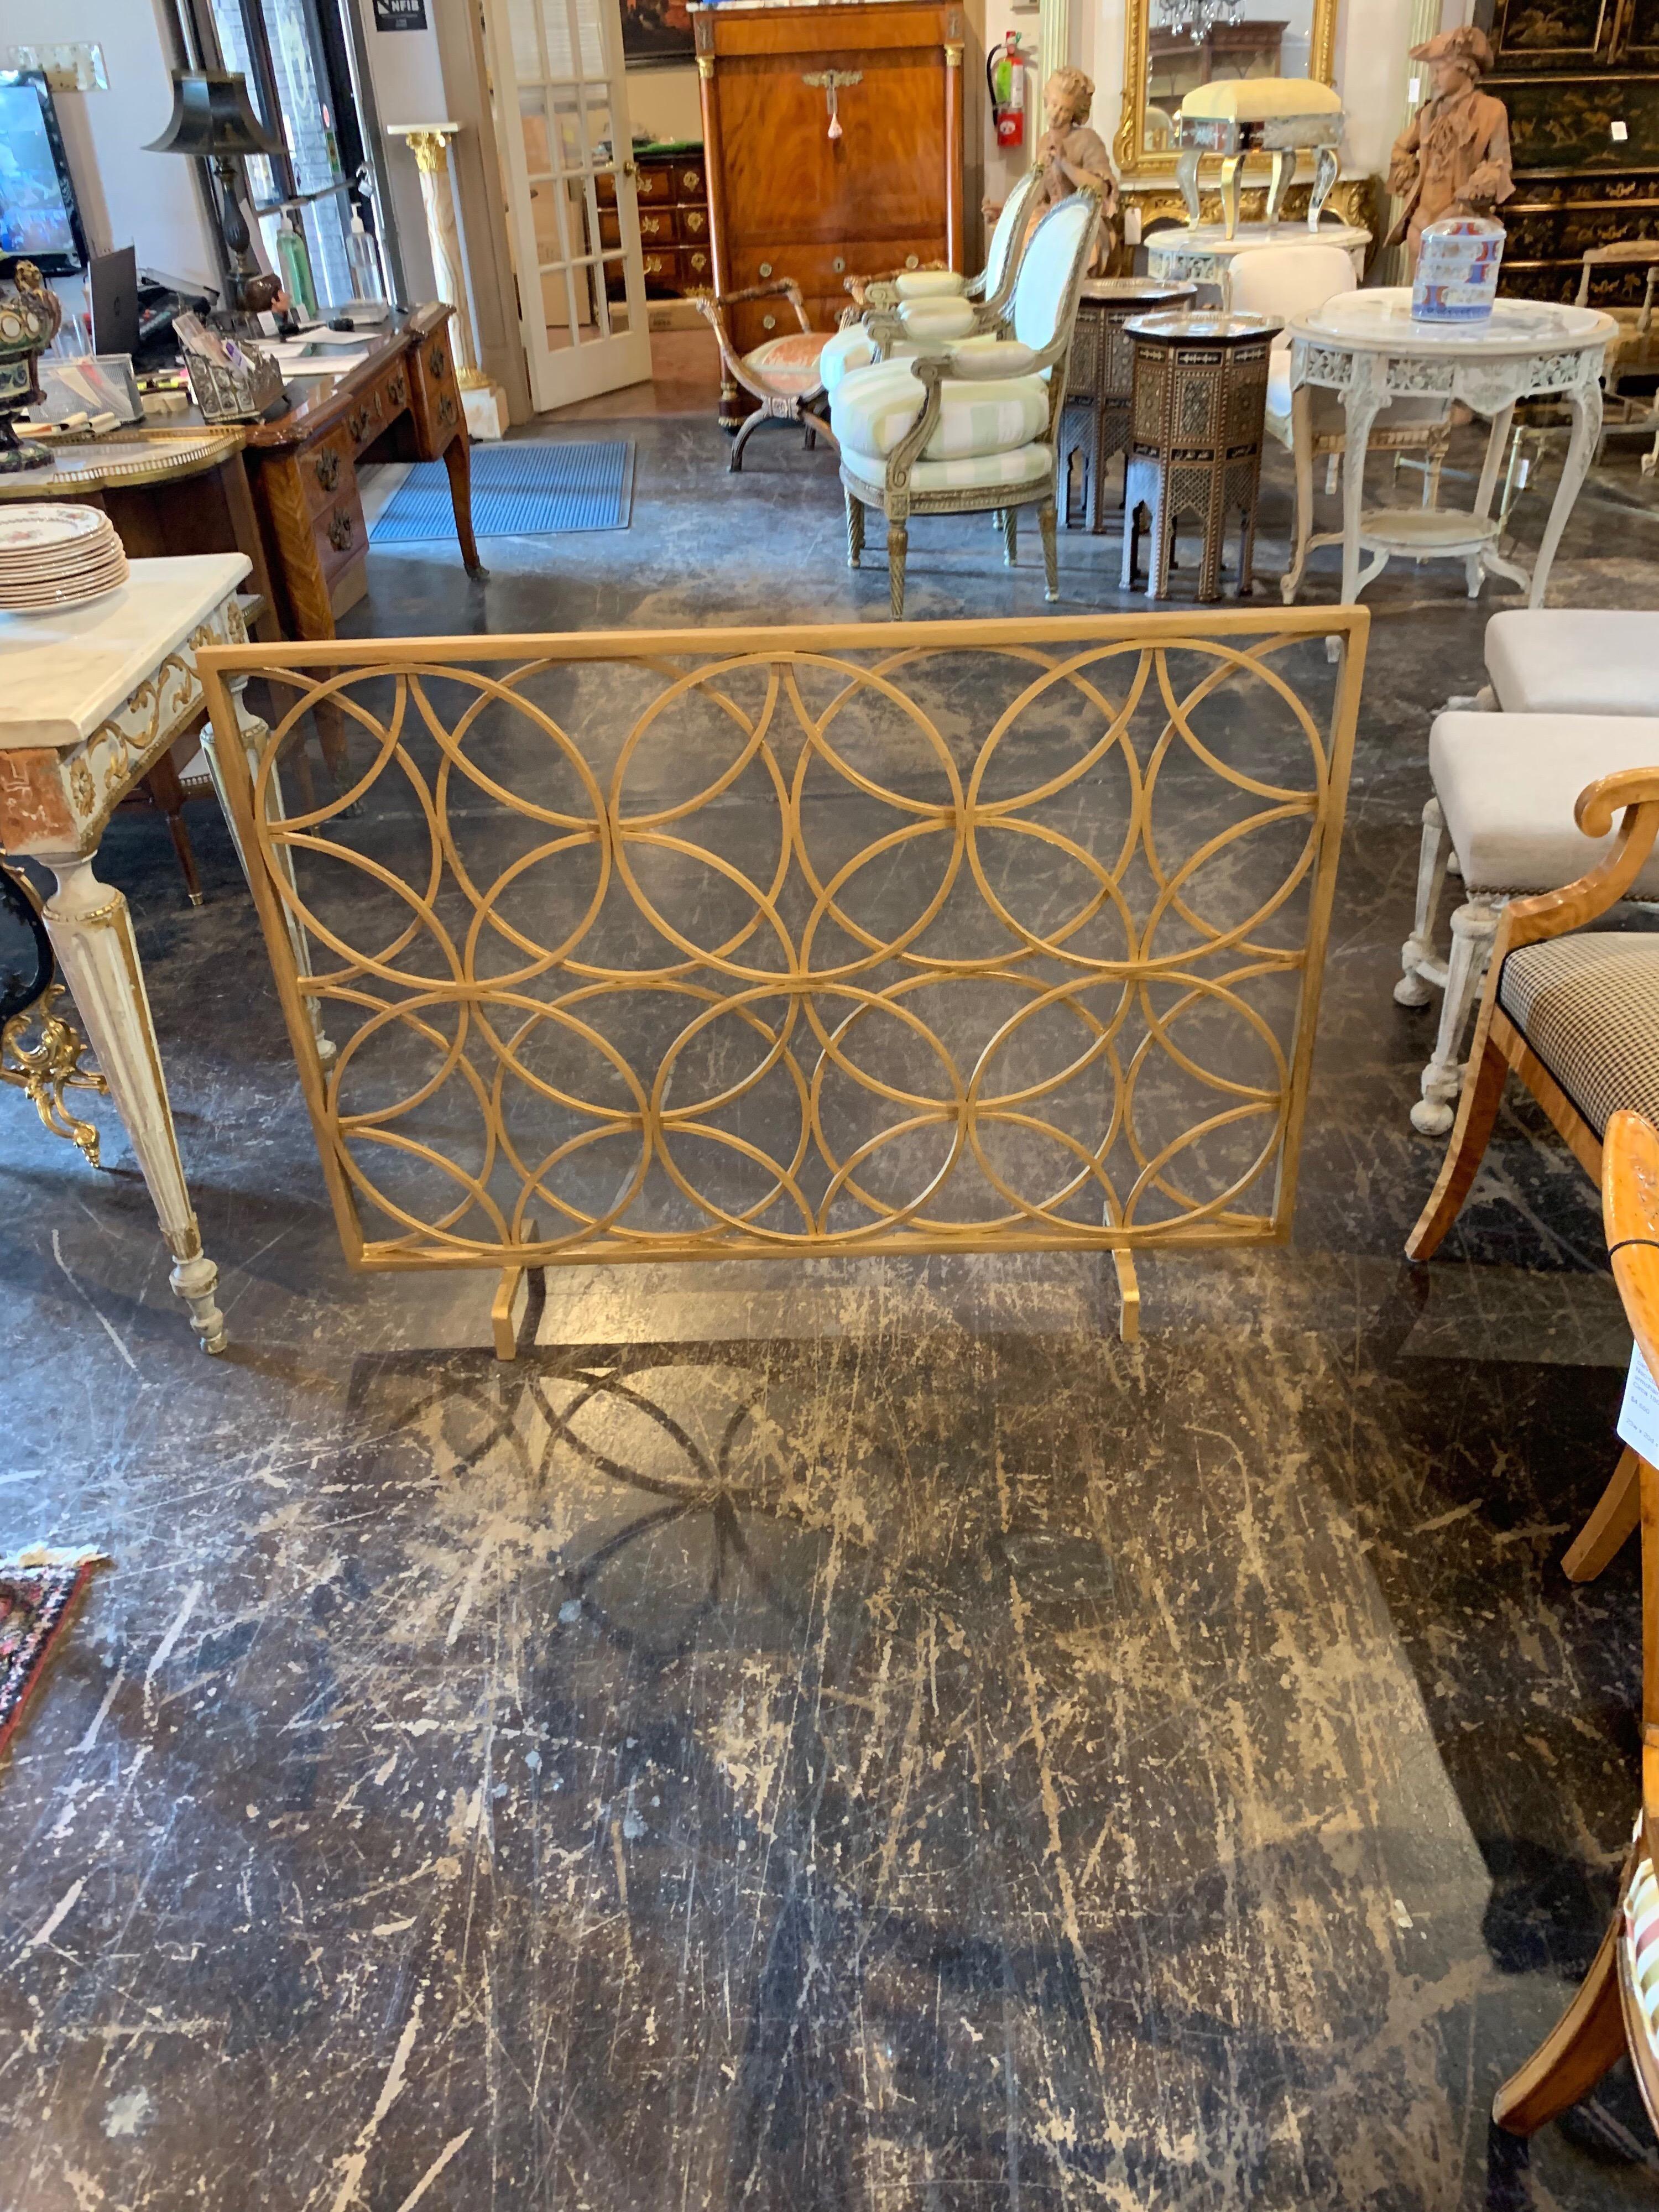 Beautiful modern style steel fire place screen custom made by Legacy. Circular pattern in gold gilt. Very special!